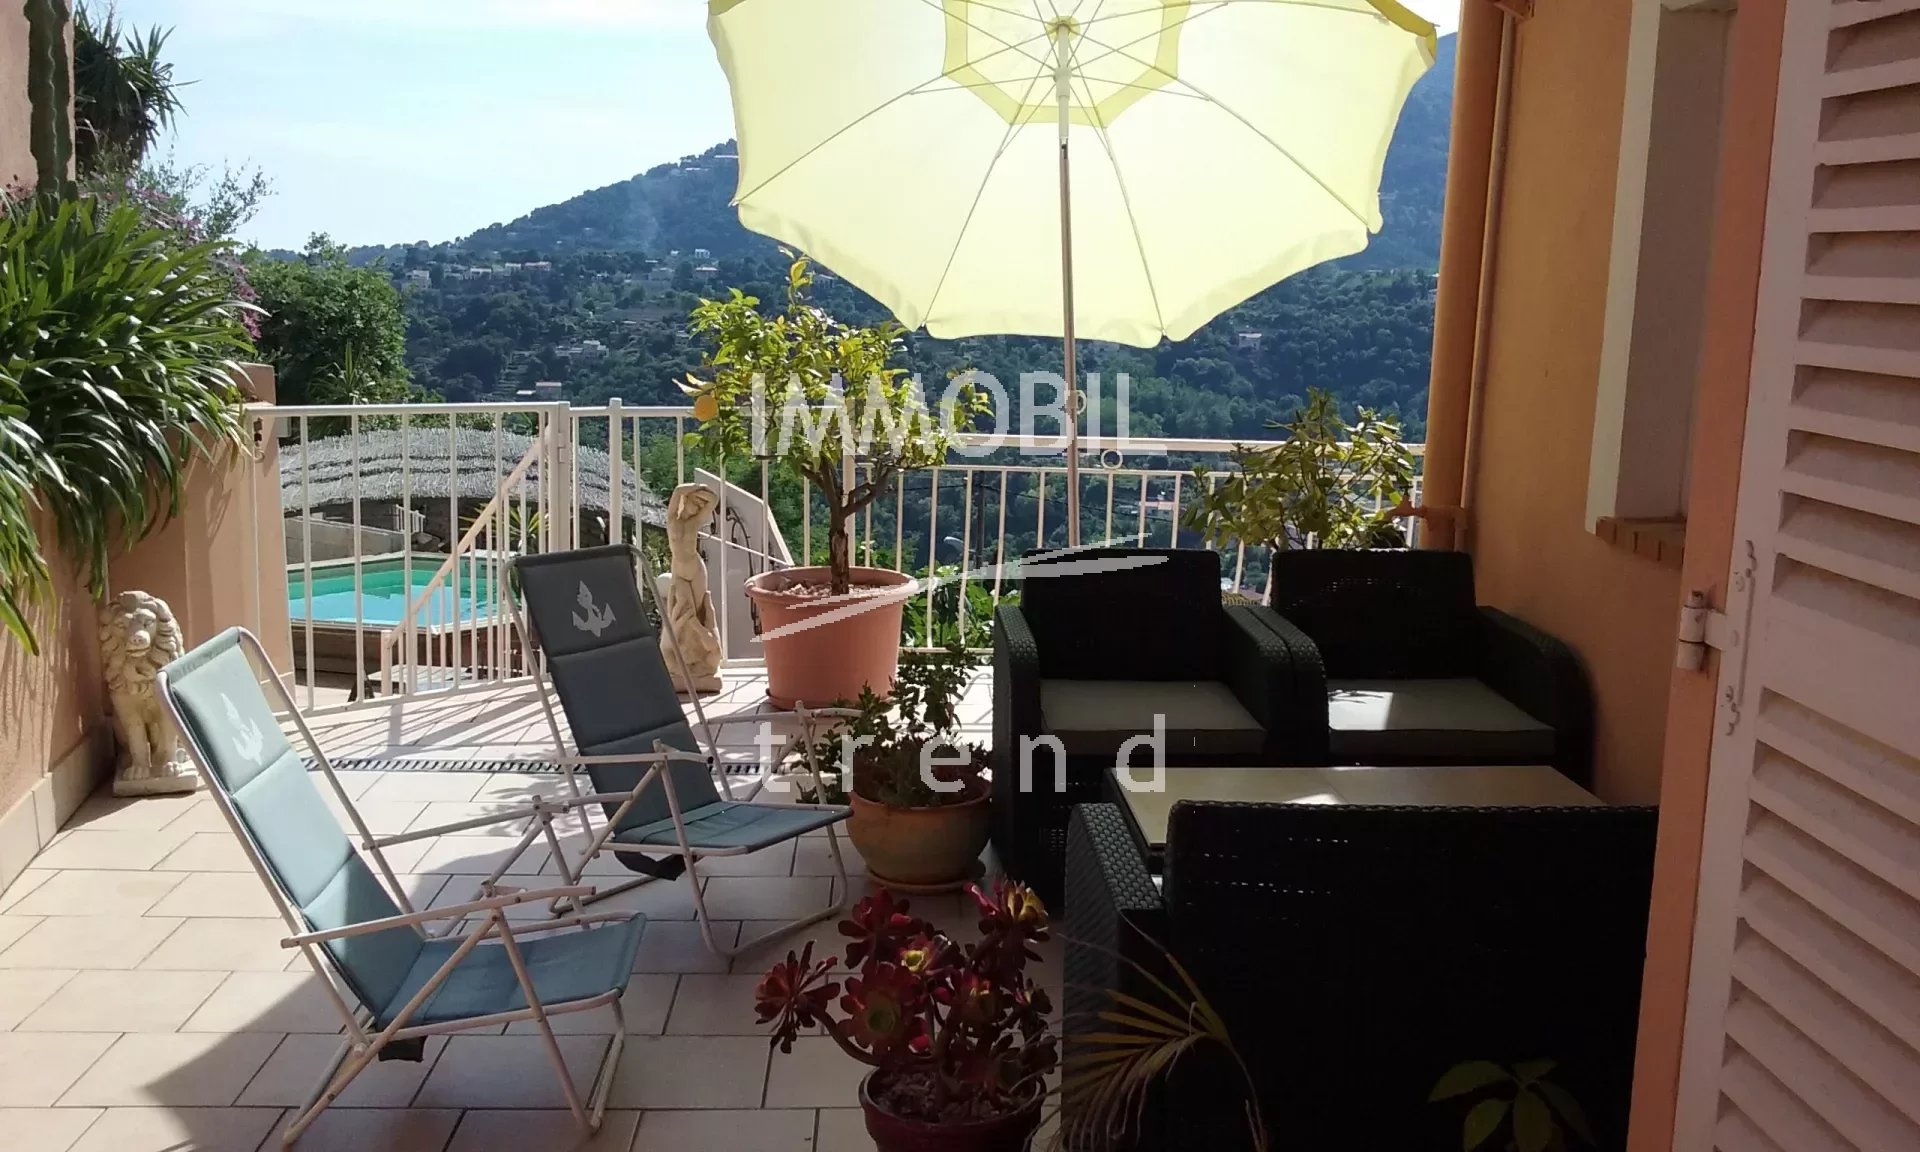 MENTON NEAR MONASTERY OF THE ANNONCIADE PART OF HOUSE 8 ROOMS + TERRACES + SWIMMING POOL